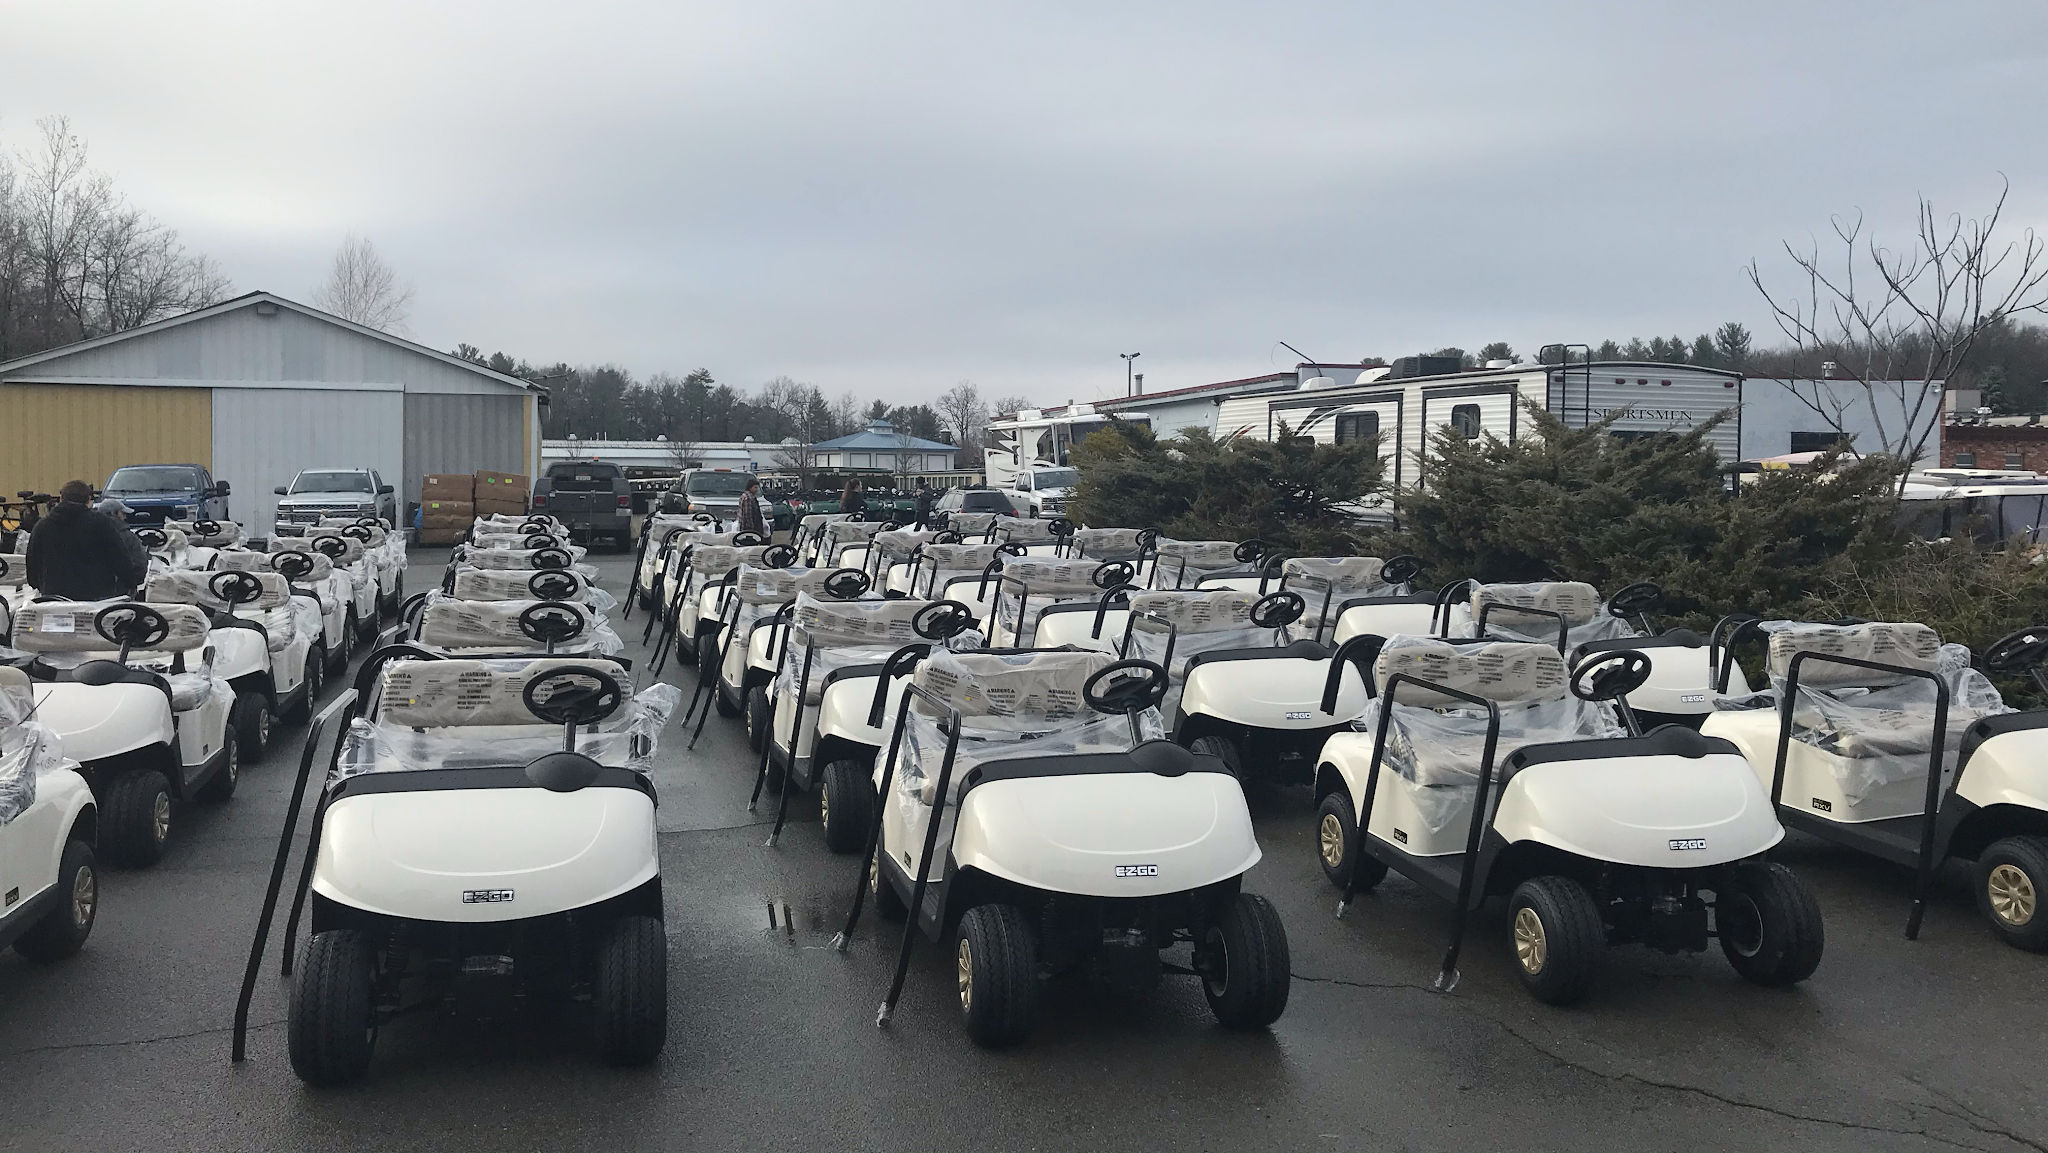 Five Star Golf Cars & Utility Vehicles Buzzards Bay